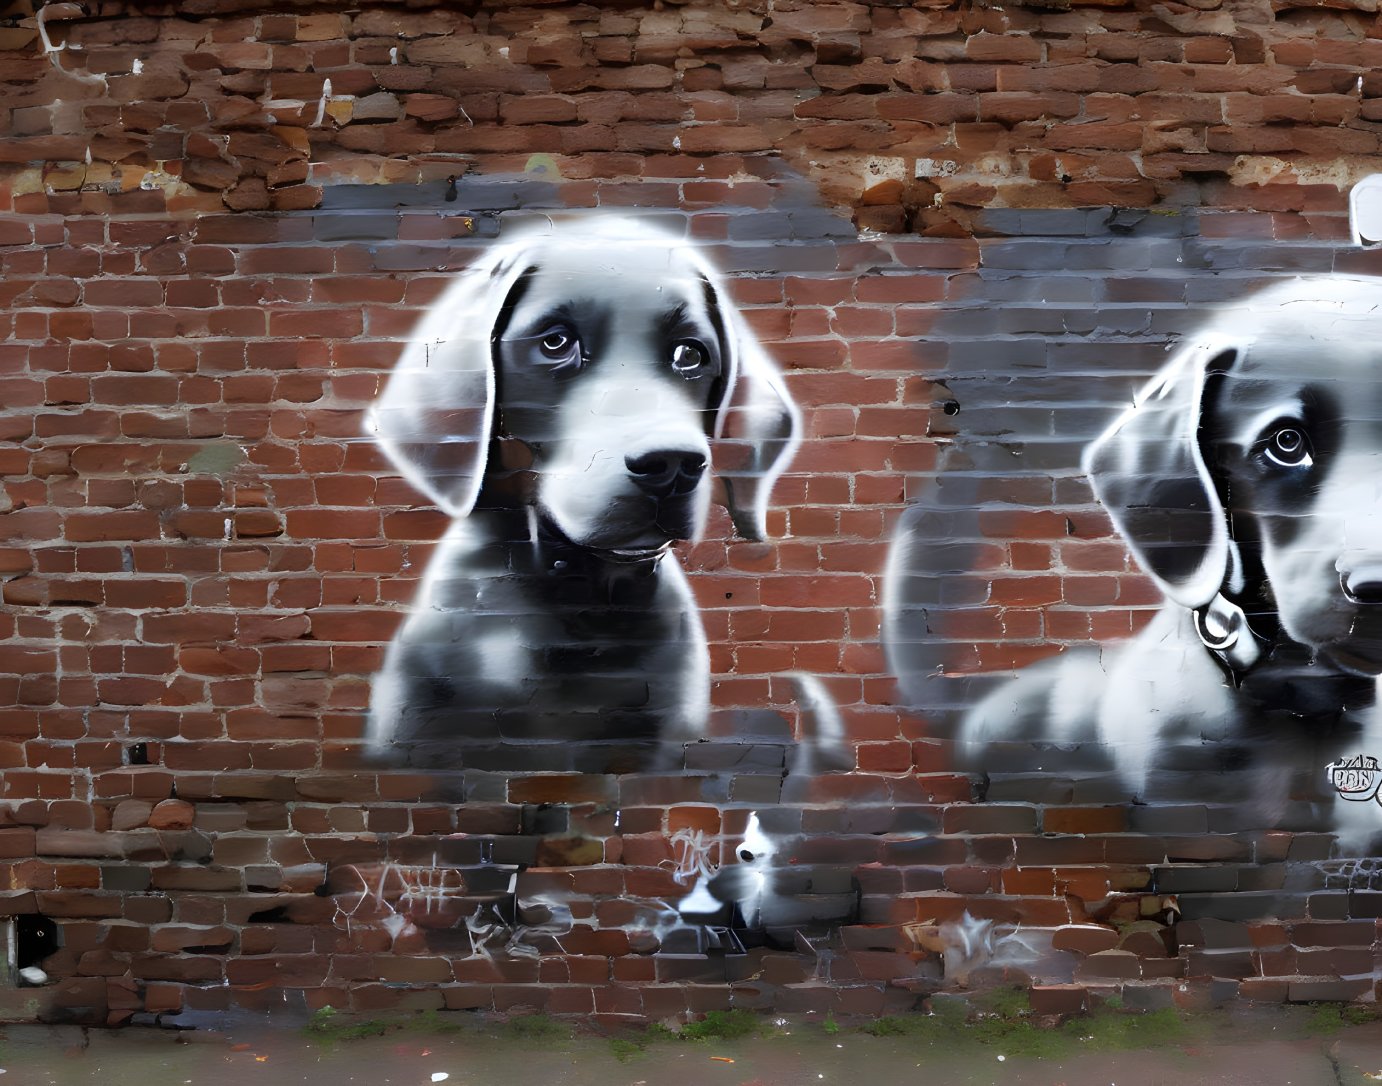 Black and white graffiti murals of puppies and cat on weathered brick wall